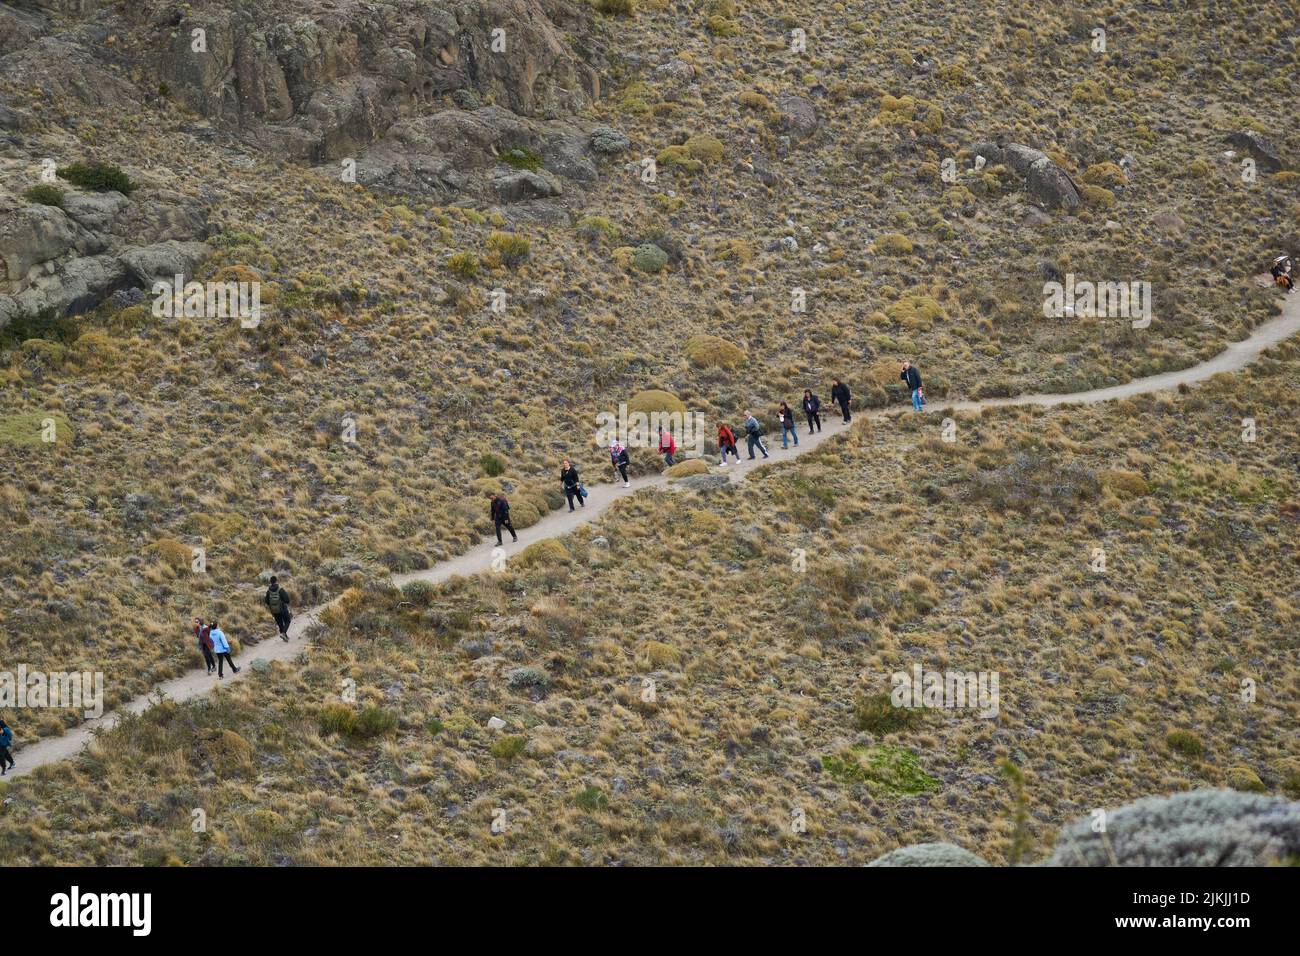 A group of hikers walking along a narrow hill path Stock Photo